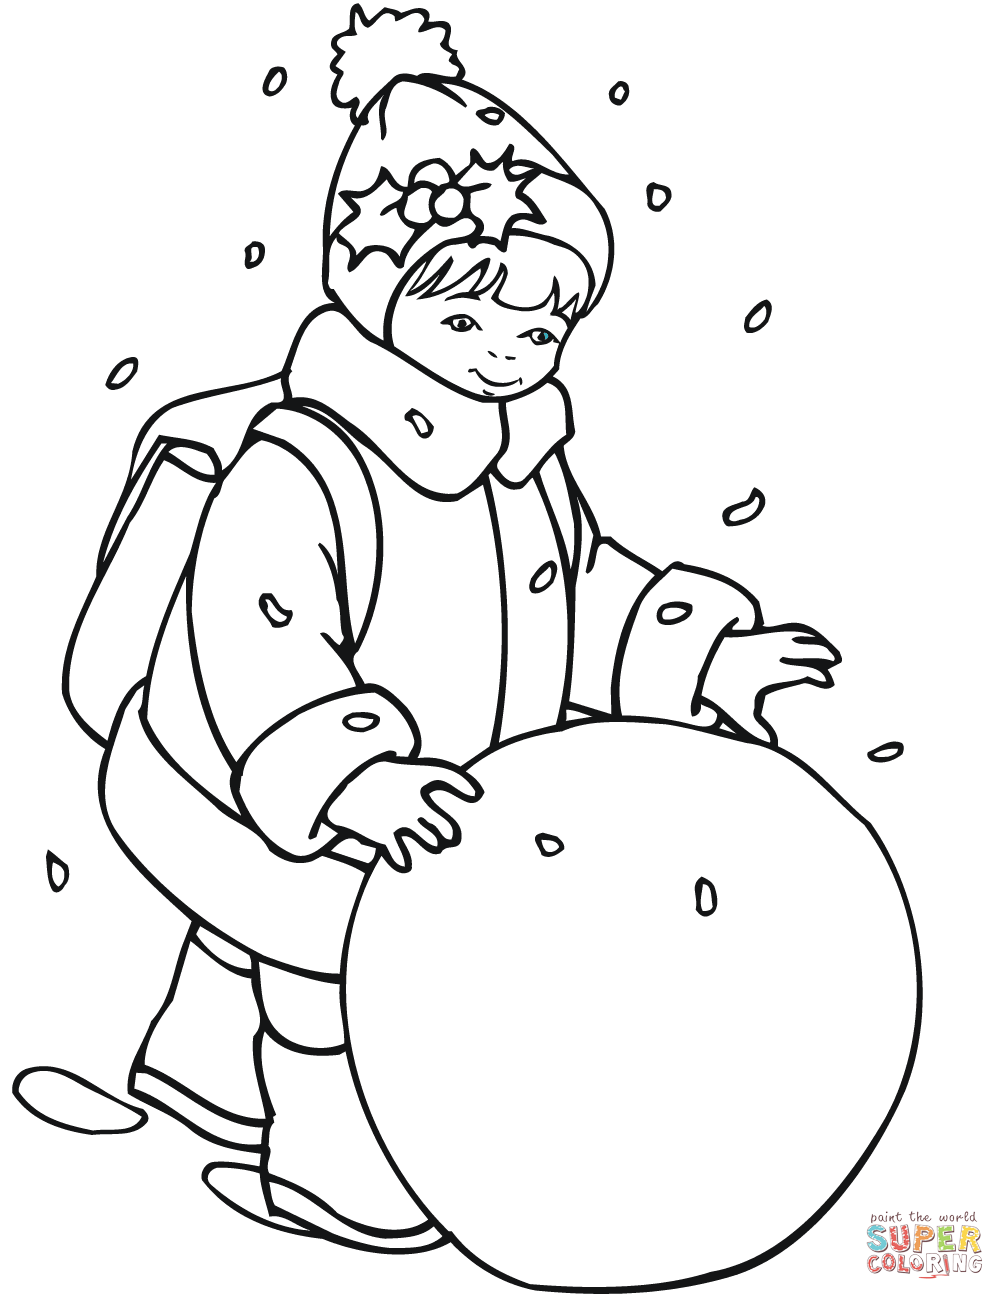 Little girl rolling a snowball coloring page free printable coloring pages